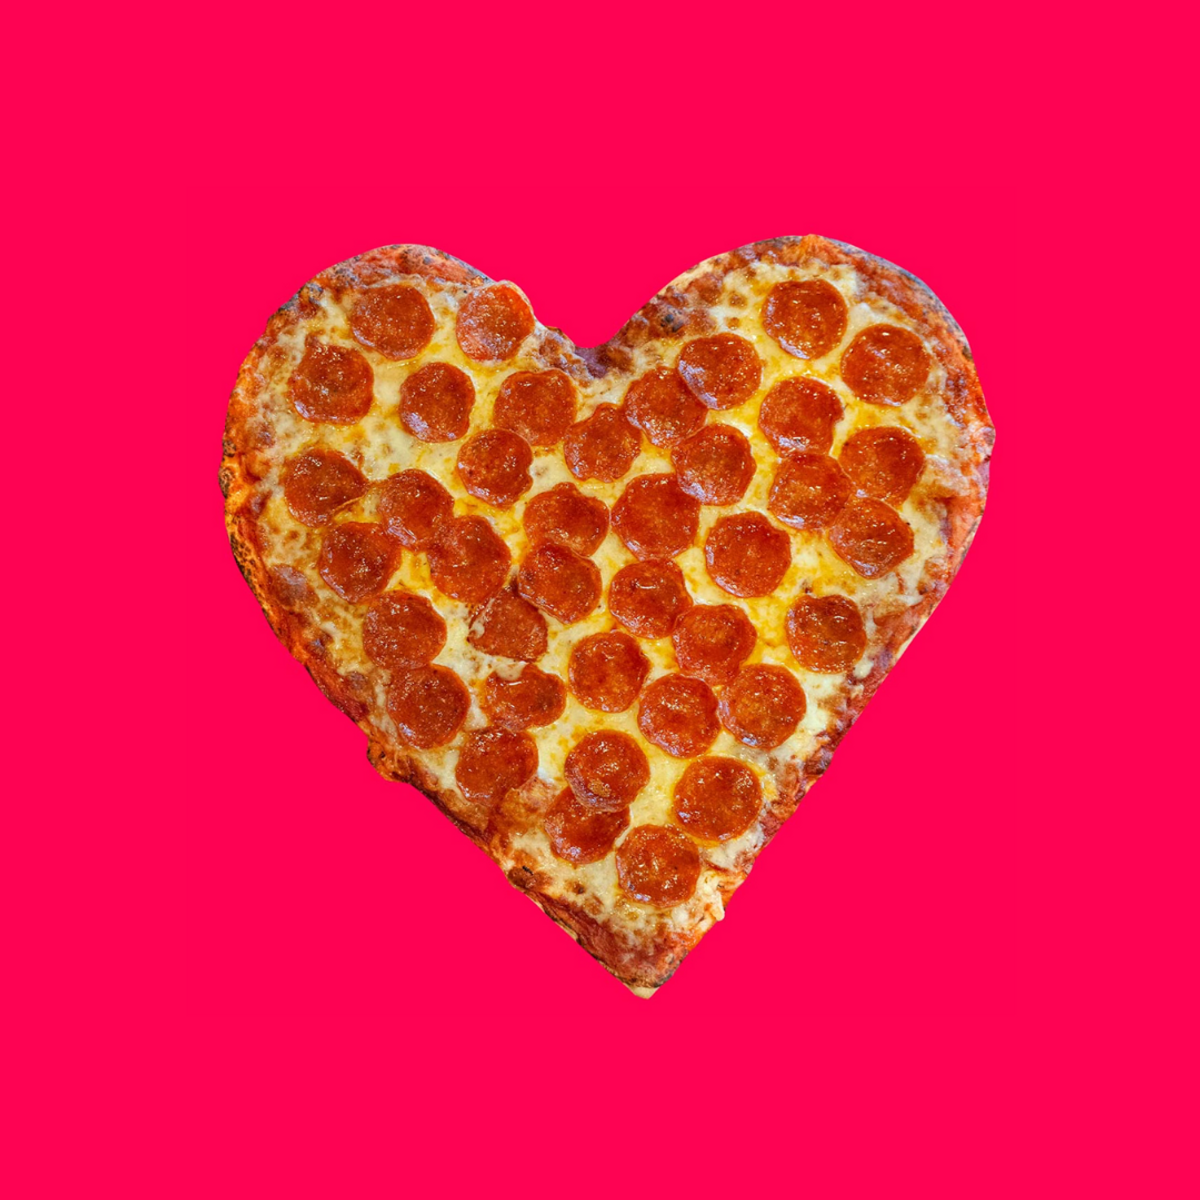 how to make heart-shaped pizza, where to buy heart-shaped pizza